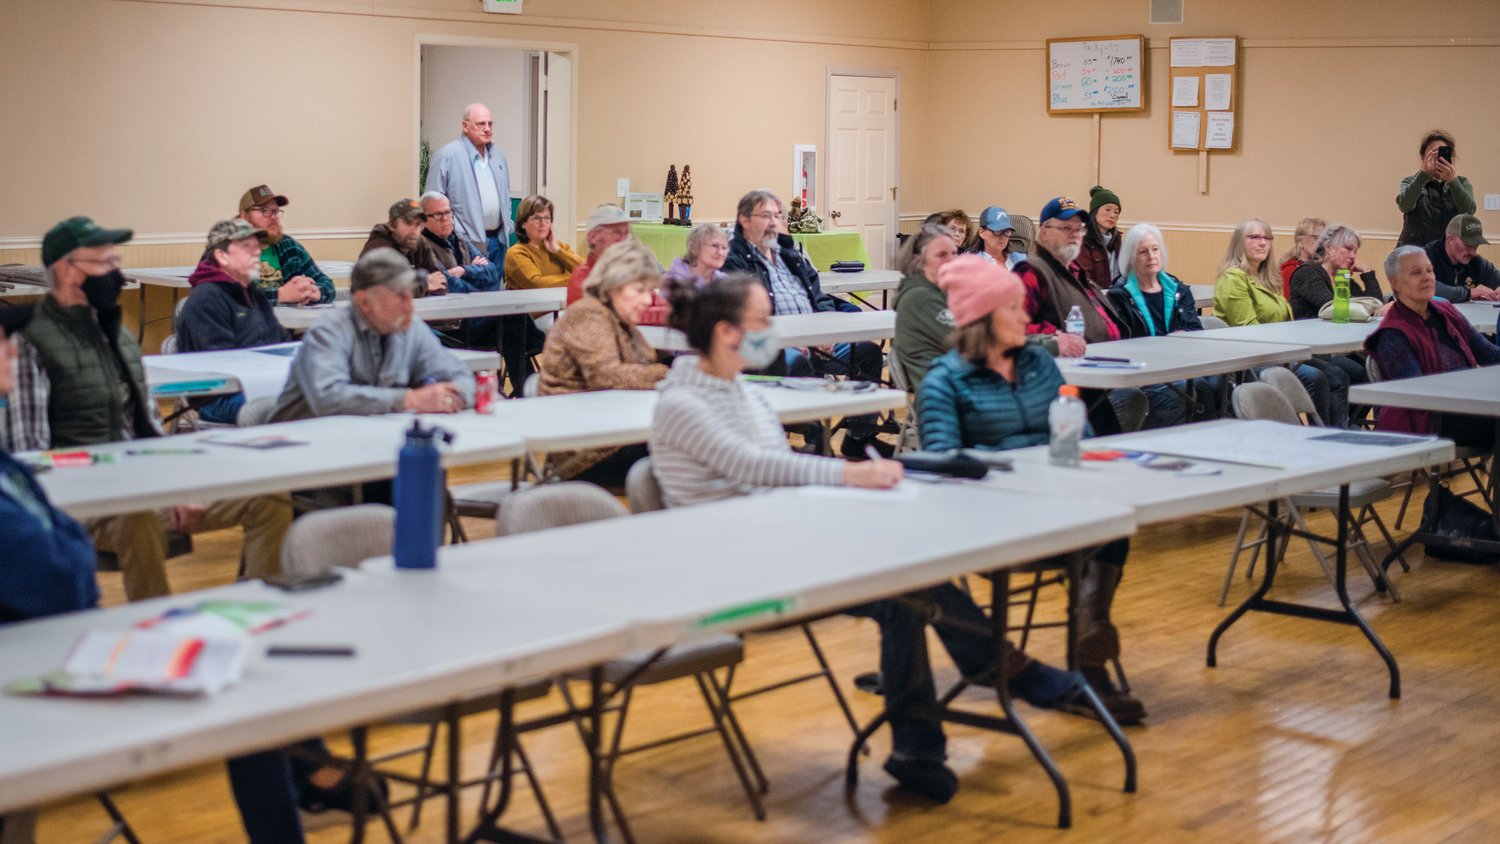 Attendees listen to speakers talk about the Community Fire Wise program Thursday night at the Packwood Community Center.